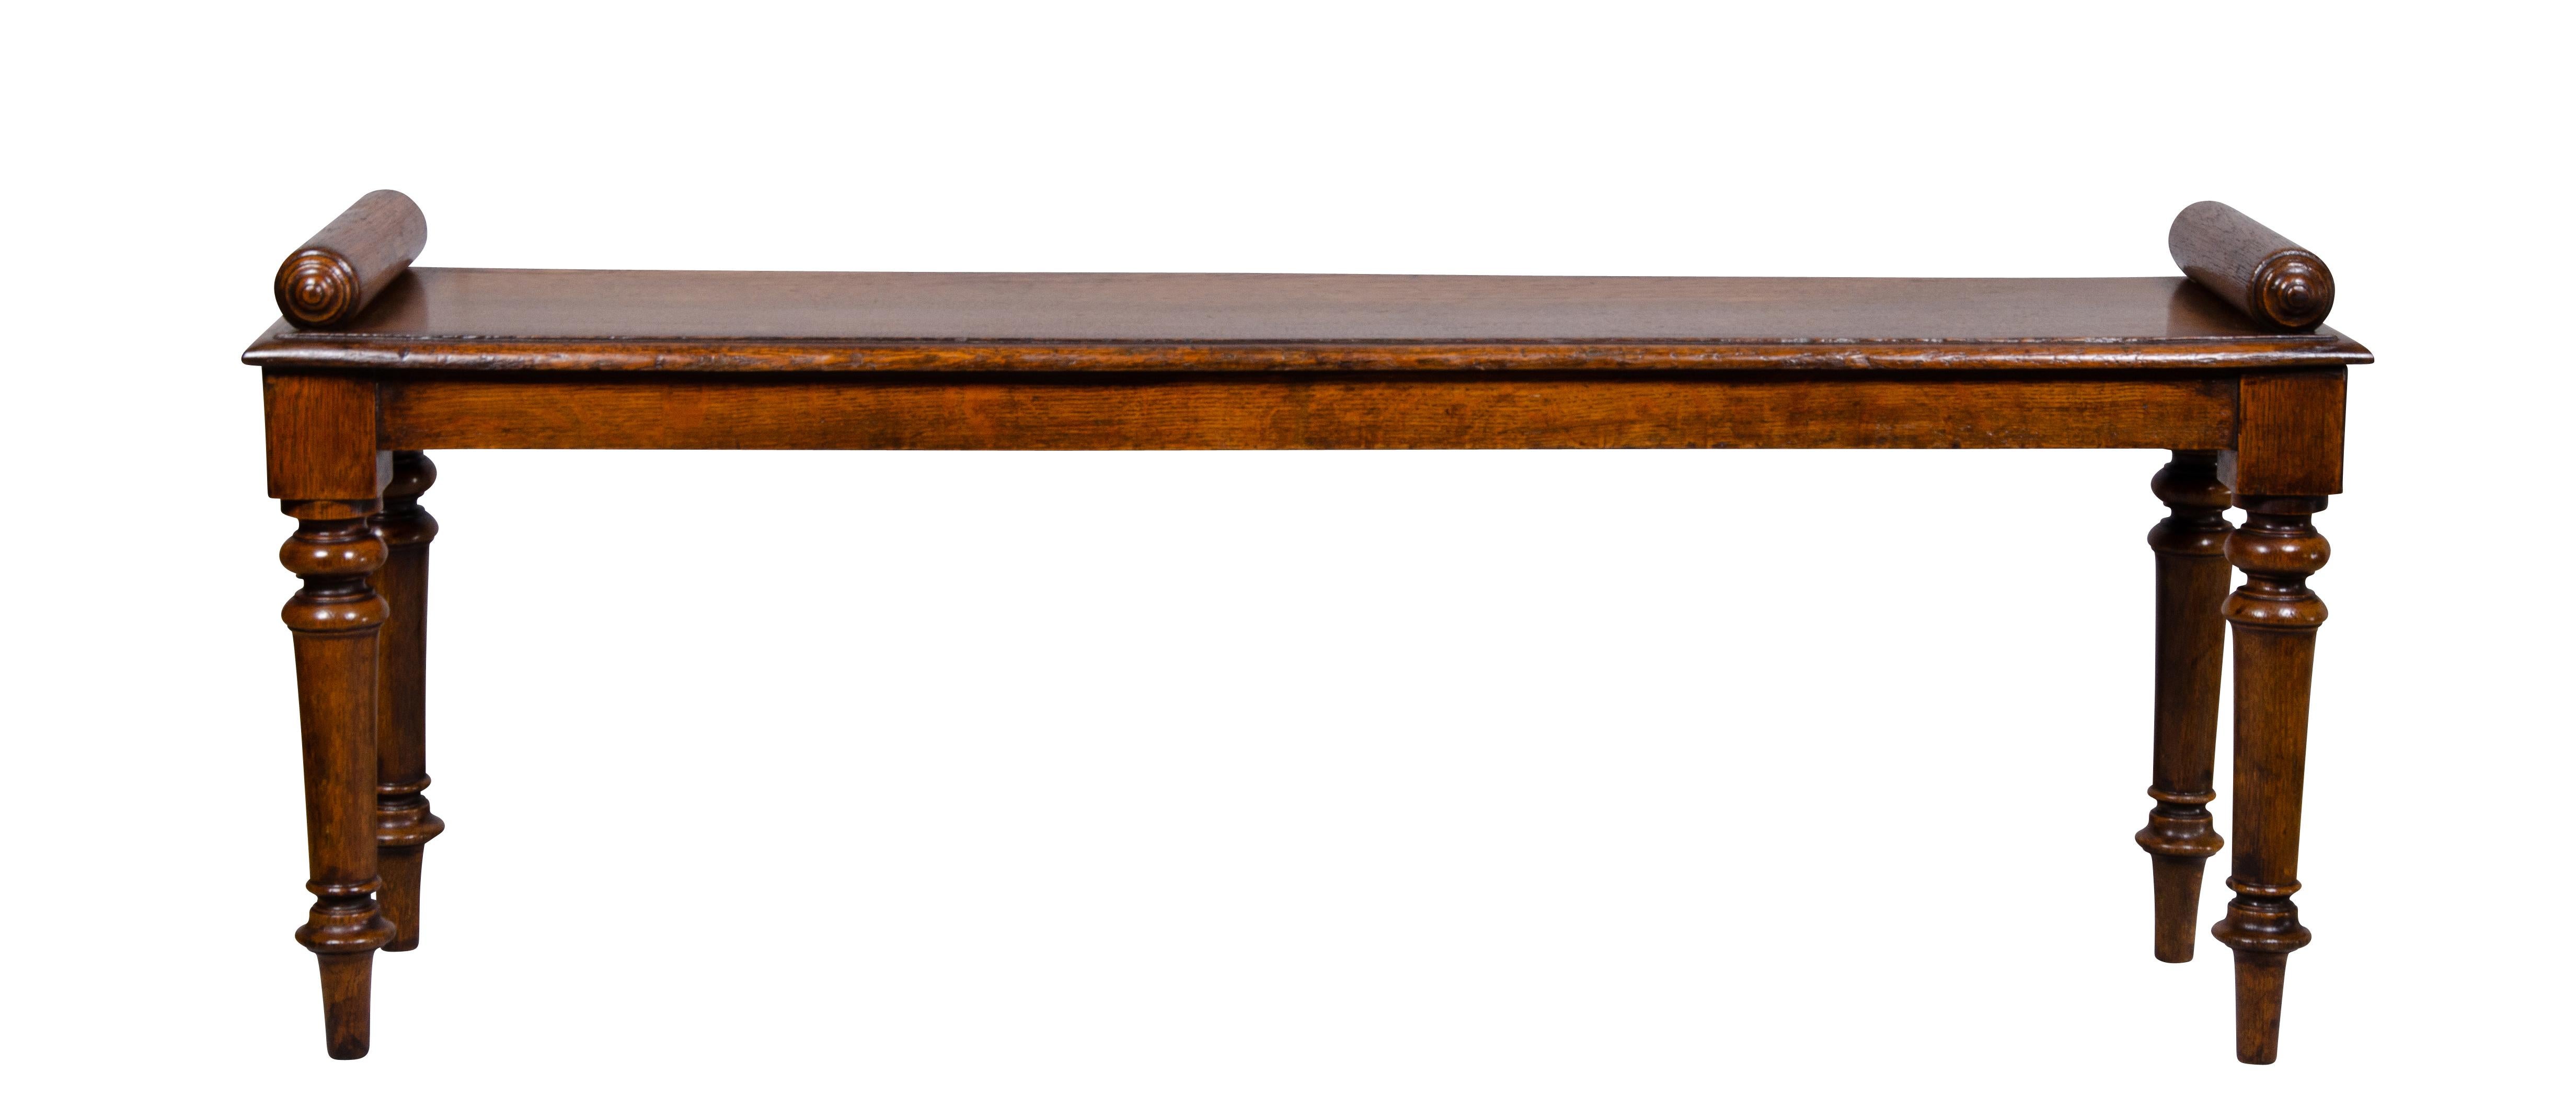 Edwardian Oak Bench Attributed to Schoolbred 2